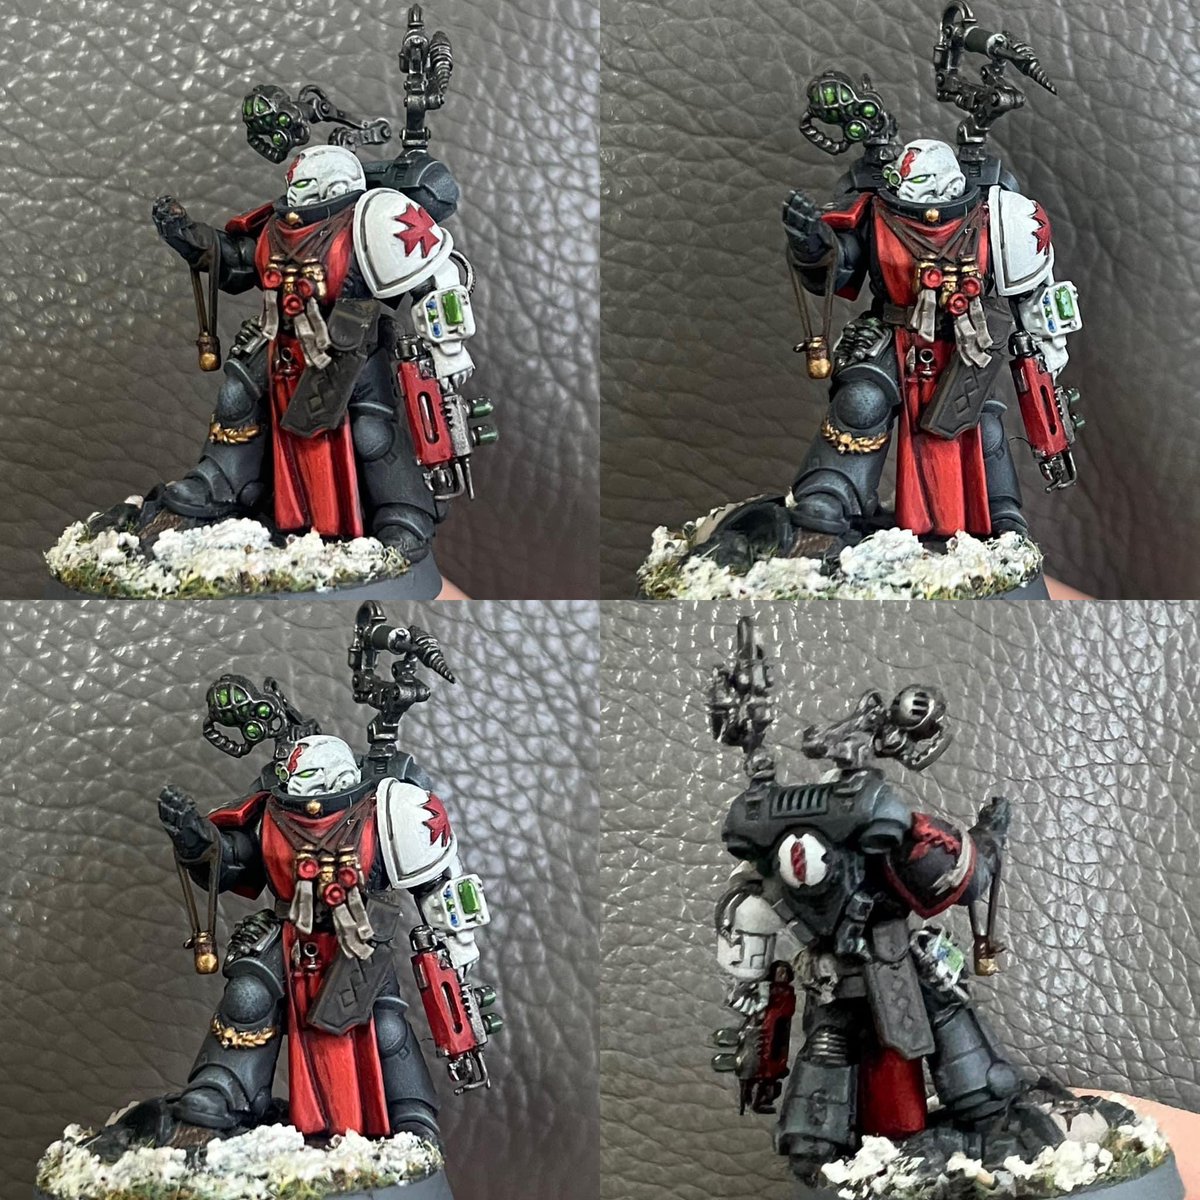 Tony Mac has got his #apothecary finished this weekend ready for #mar24btbannercompetition #btapothecaries. 

Remember, you only a few more days left to make your submissions. So get painting!

#blacktemplars #40k #blacktemplars_40k #gamesworkshop #eternalcrusader #eternalcrusade